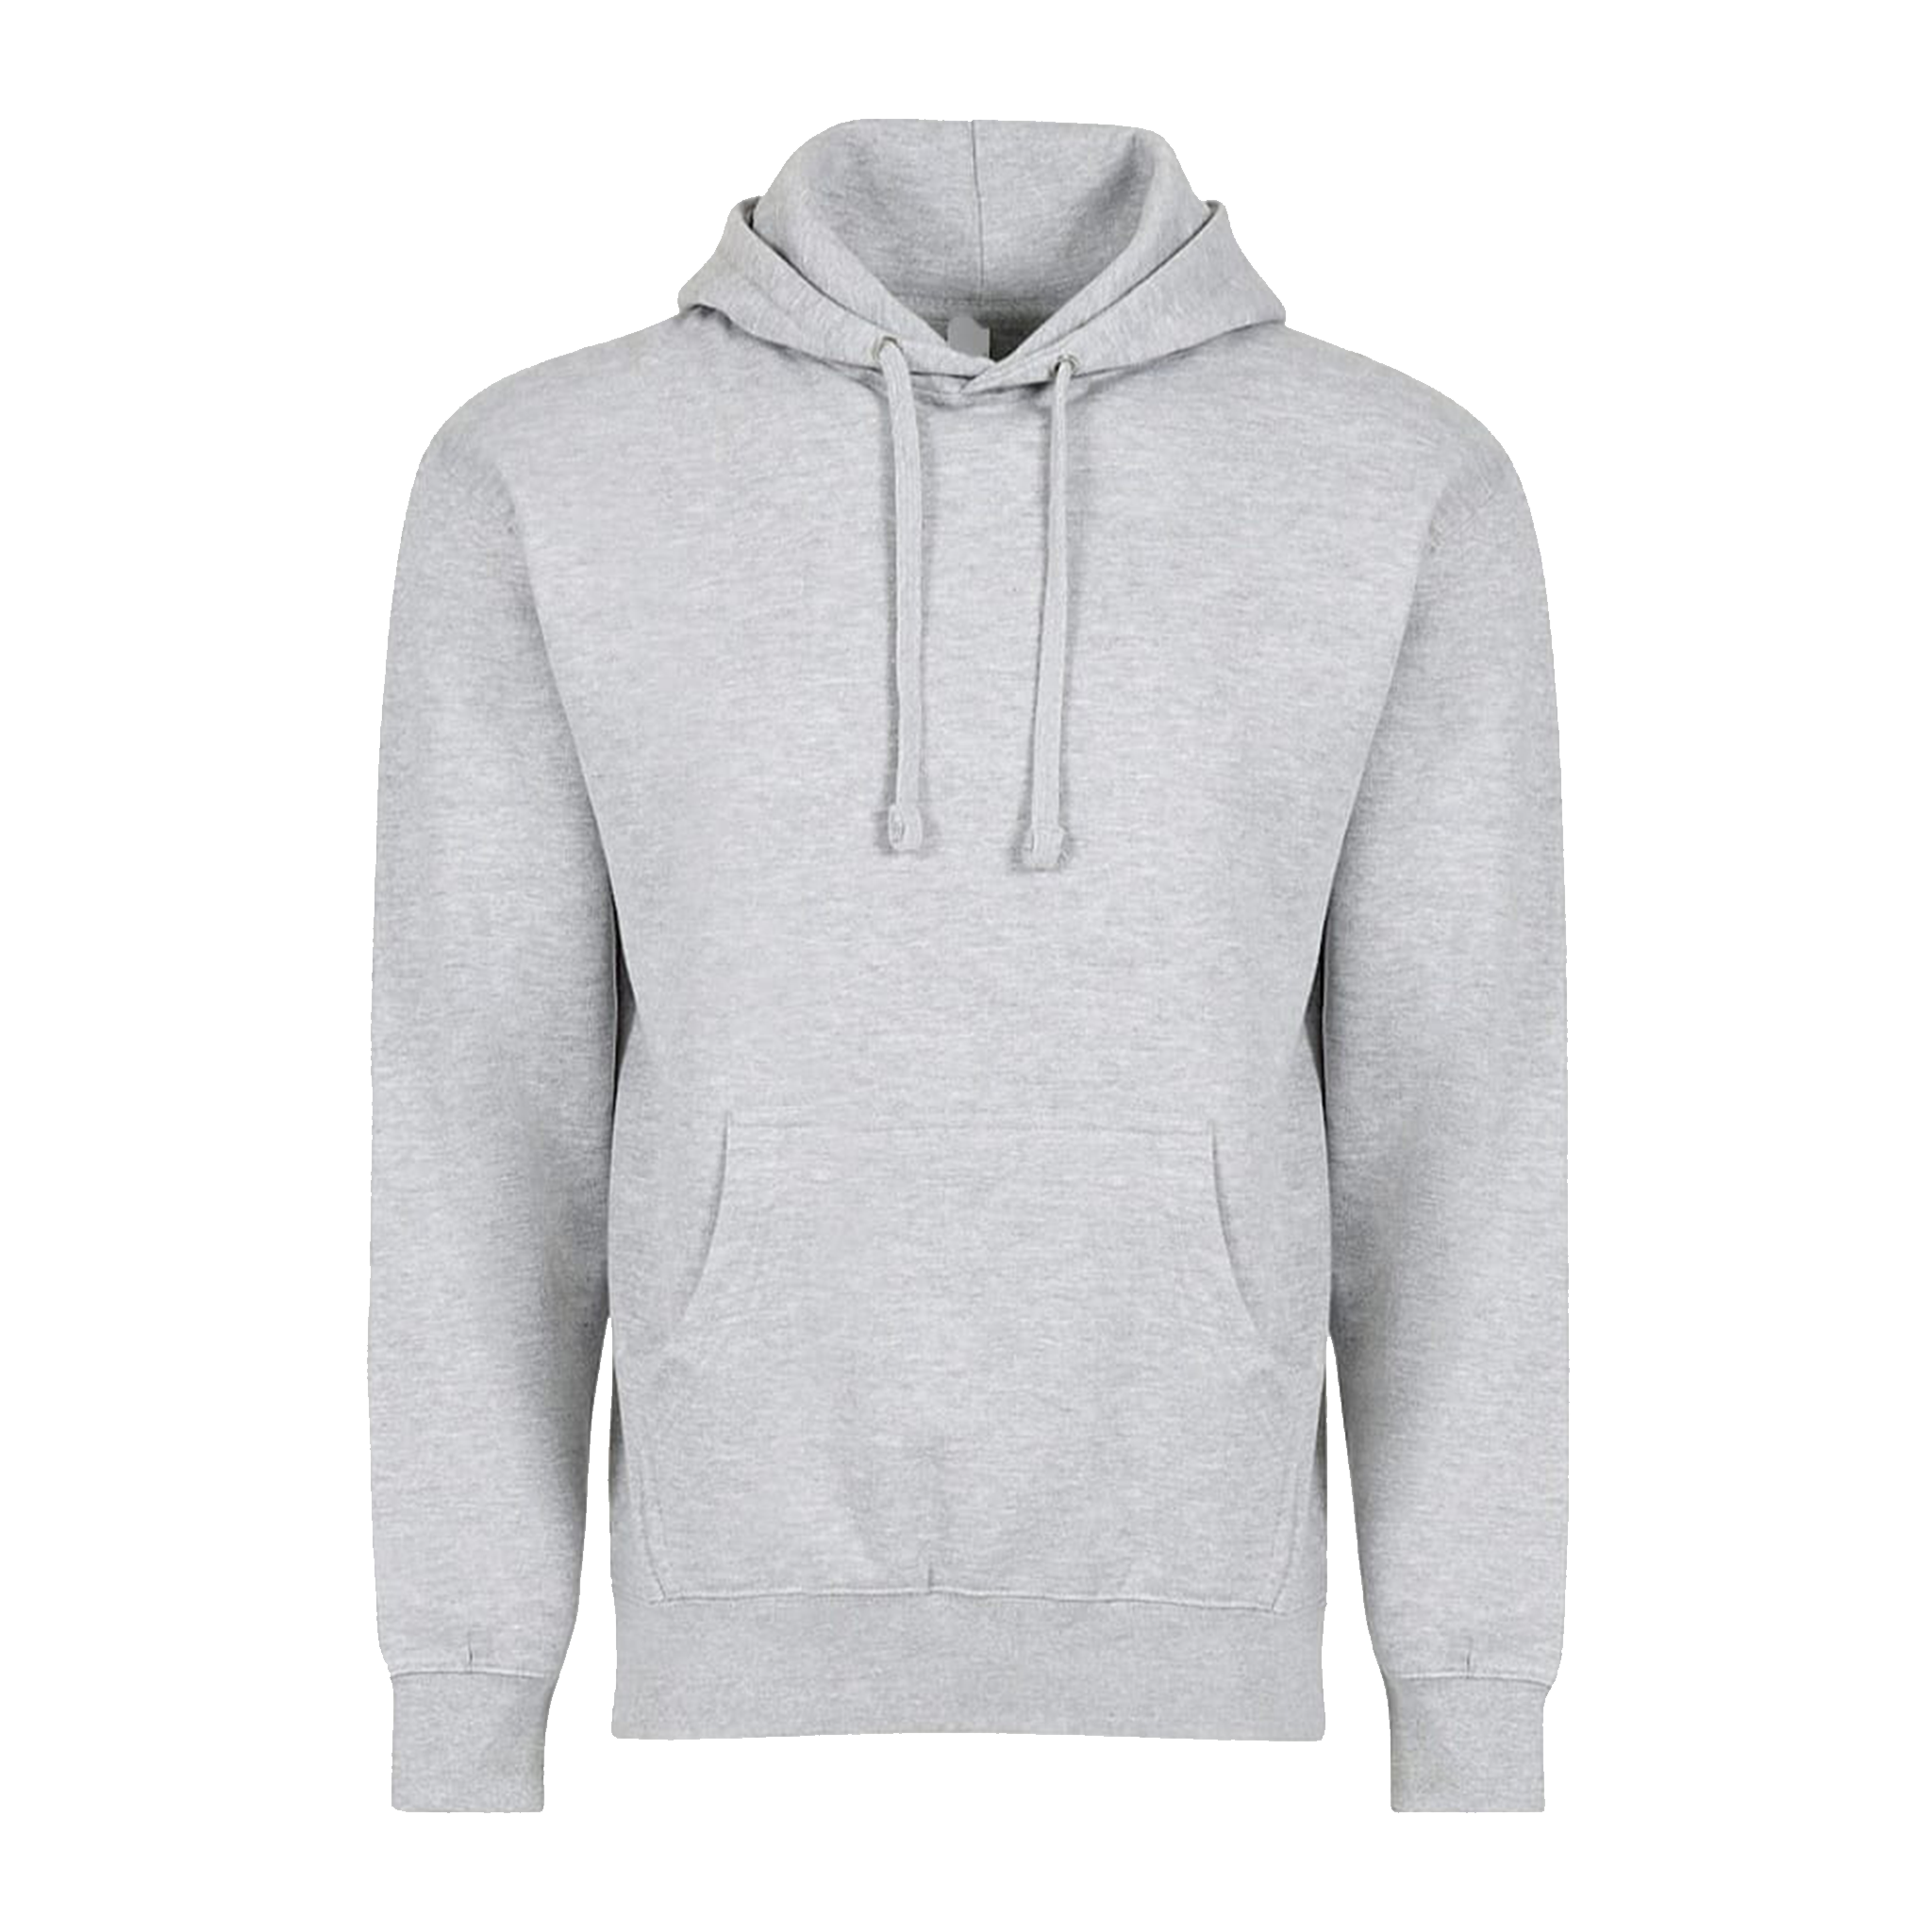 Reflections Apparel Fleece Hoodie - Adult Unisex Sizing S-3XL - Athletic Grey